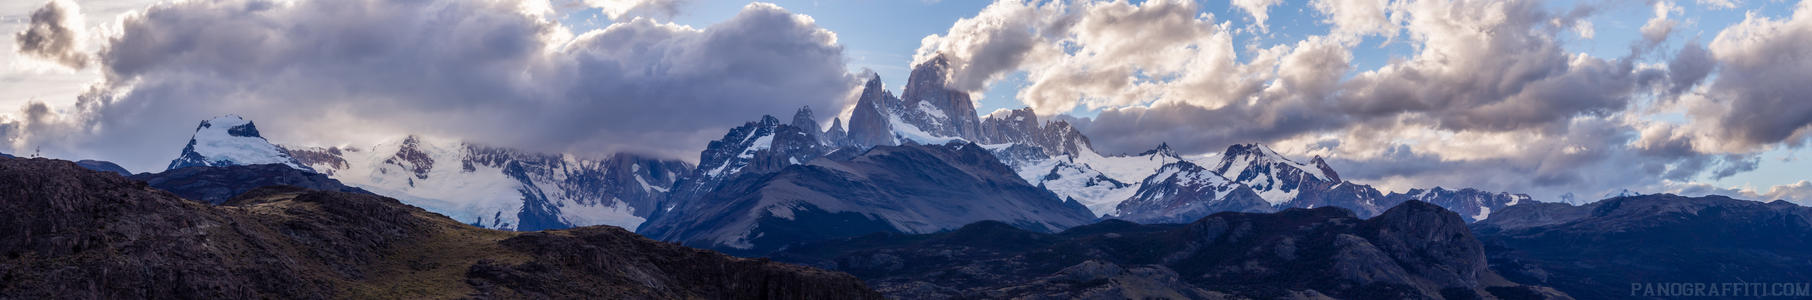 Fitz Roy from Las Aguilas - View of Fitz Roy far off in the distance surrounded by clouds